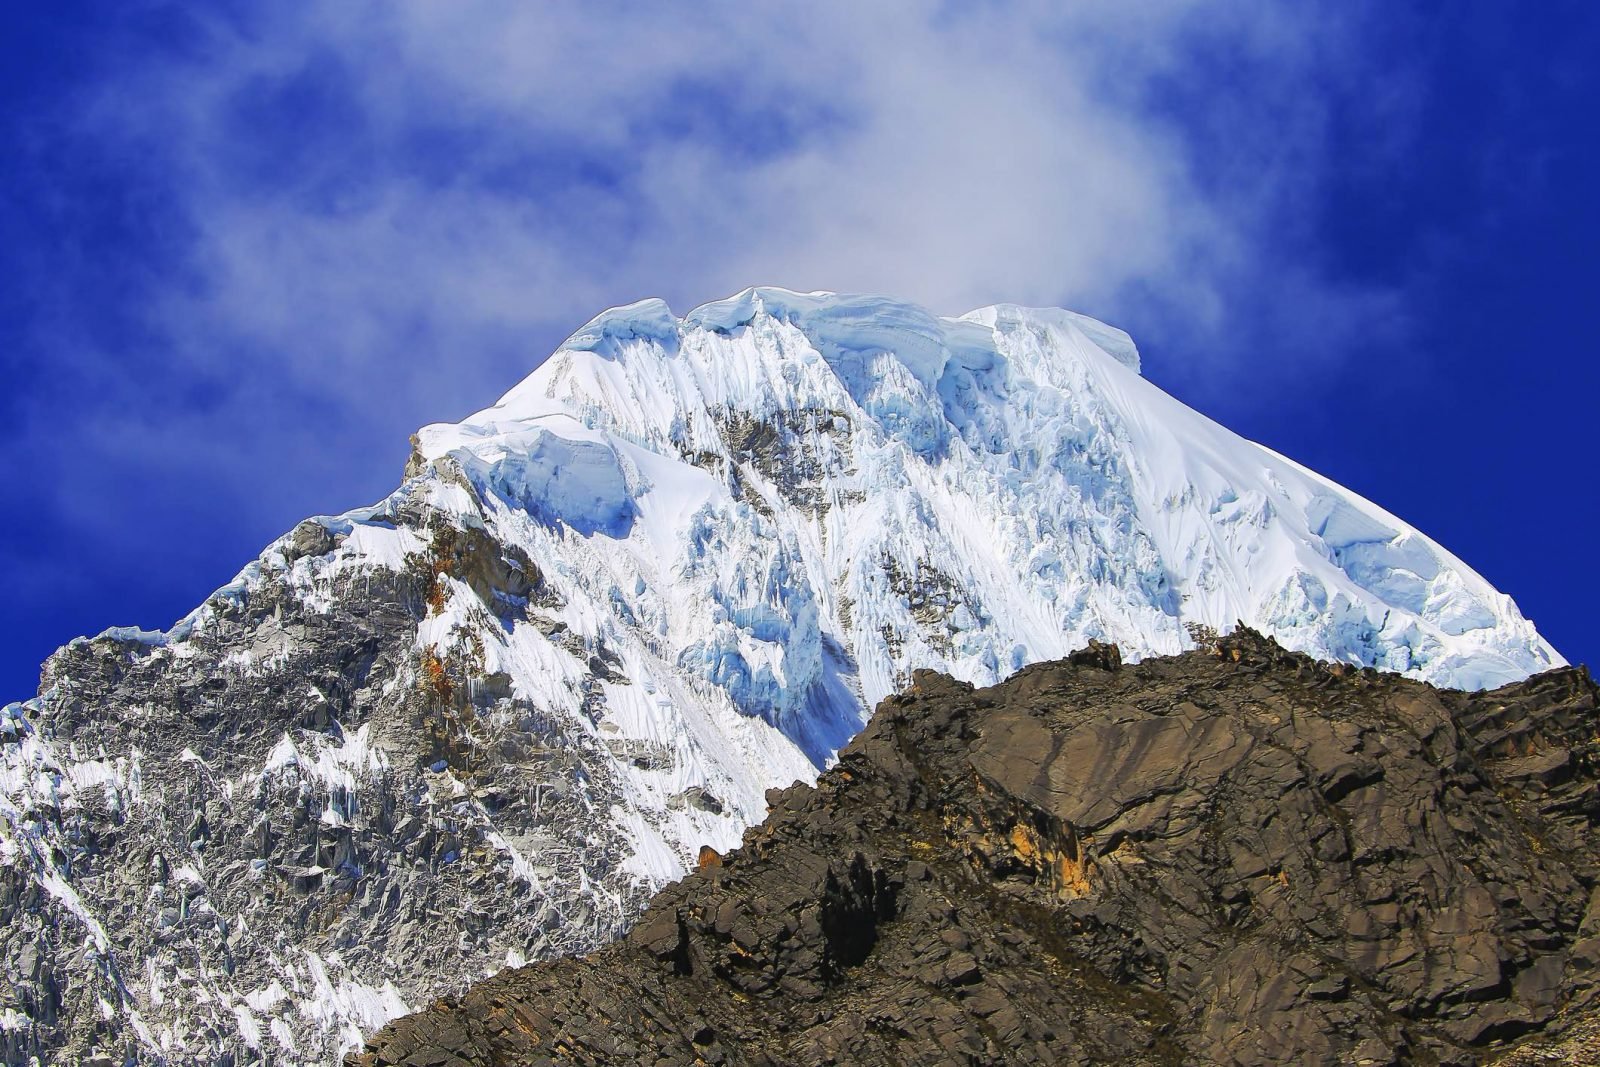 The summit of the Huascarán Mountain in Peru